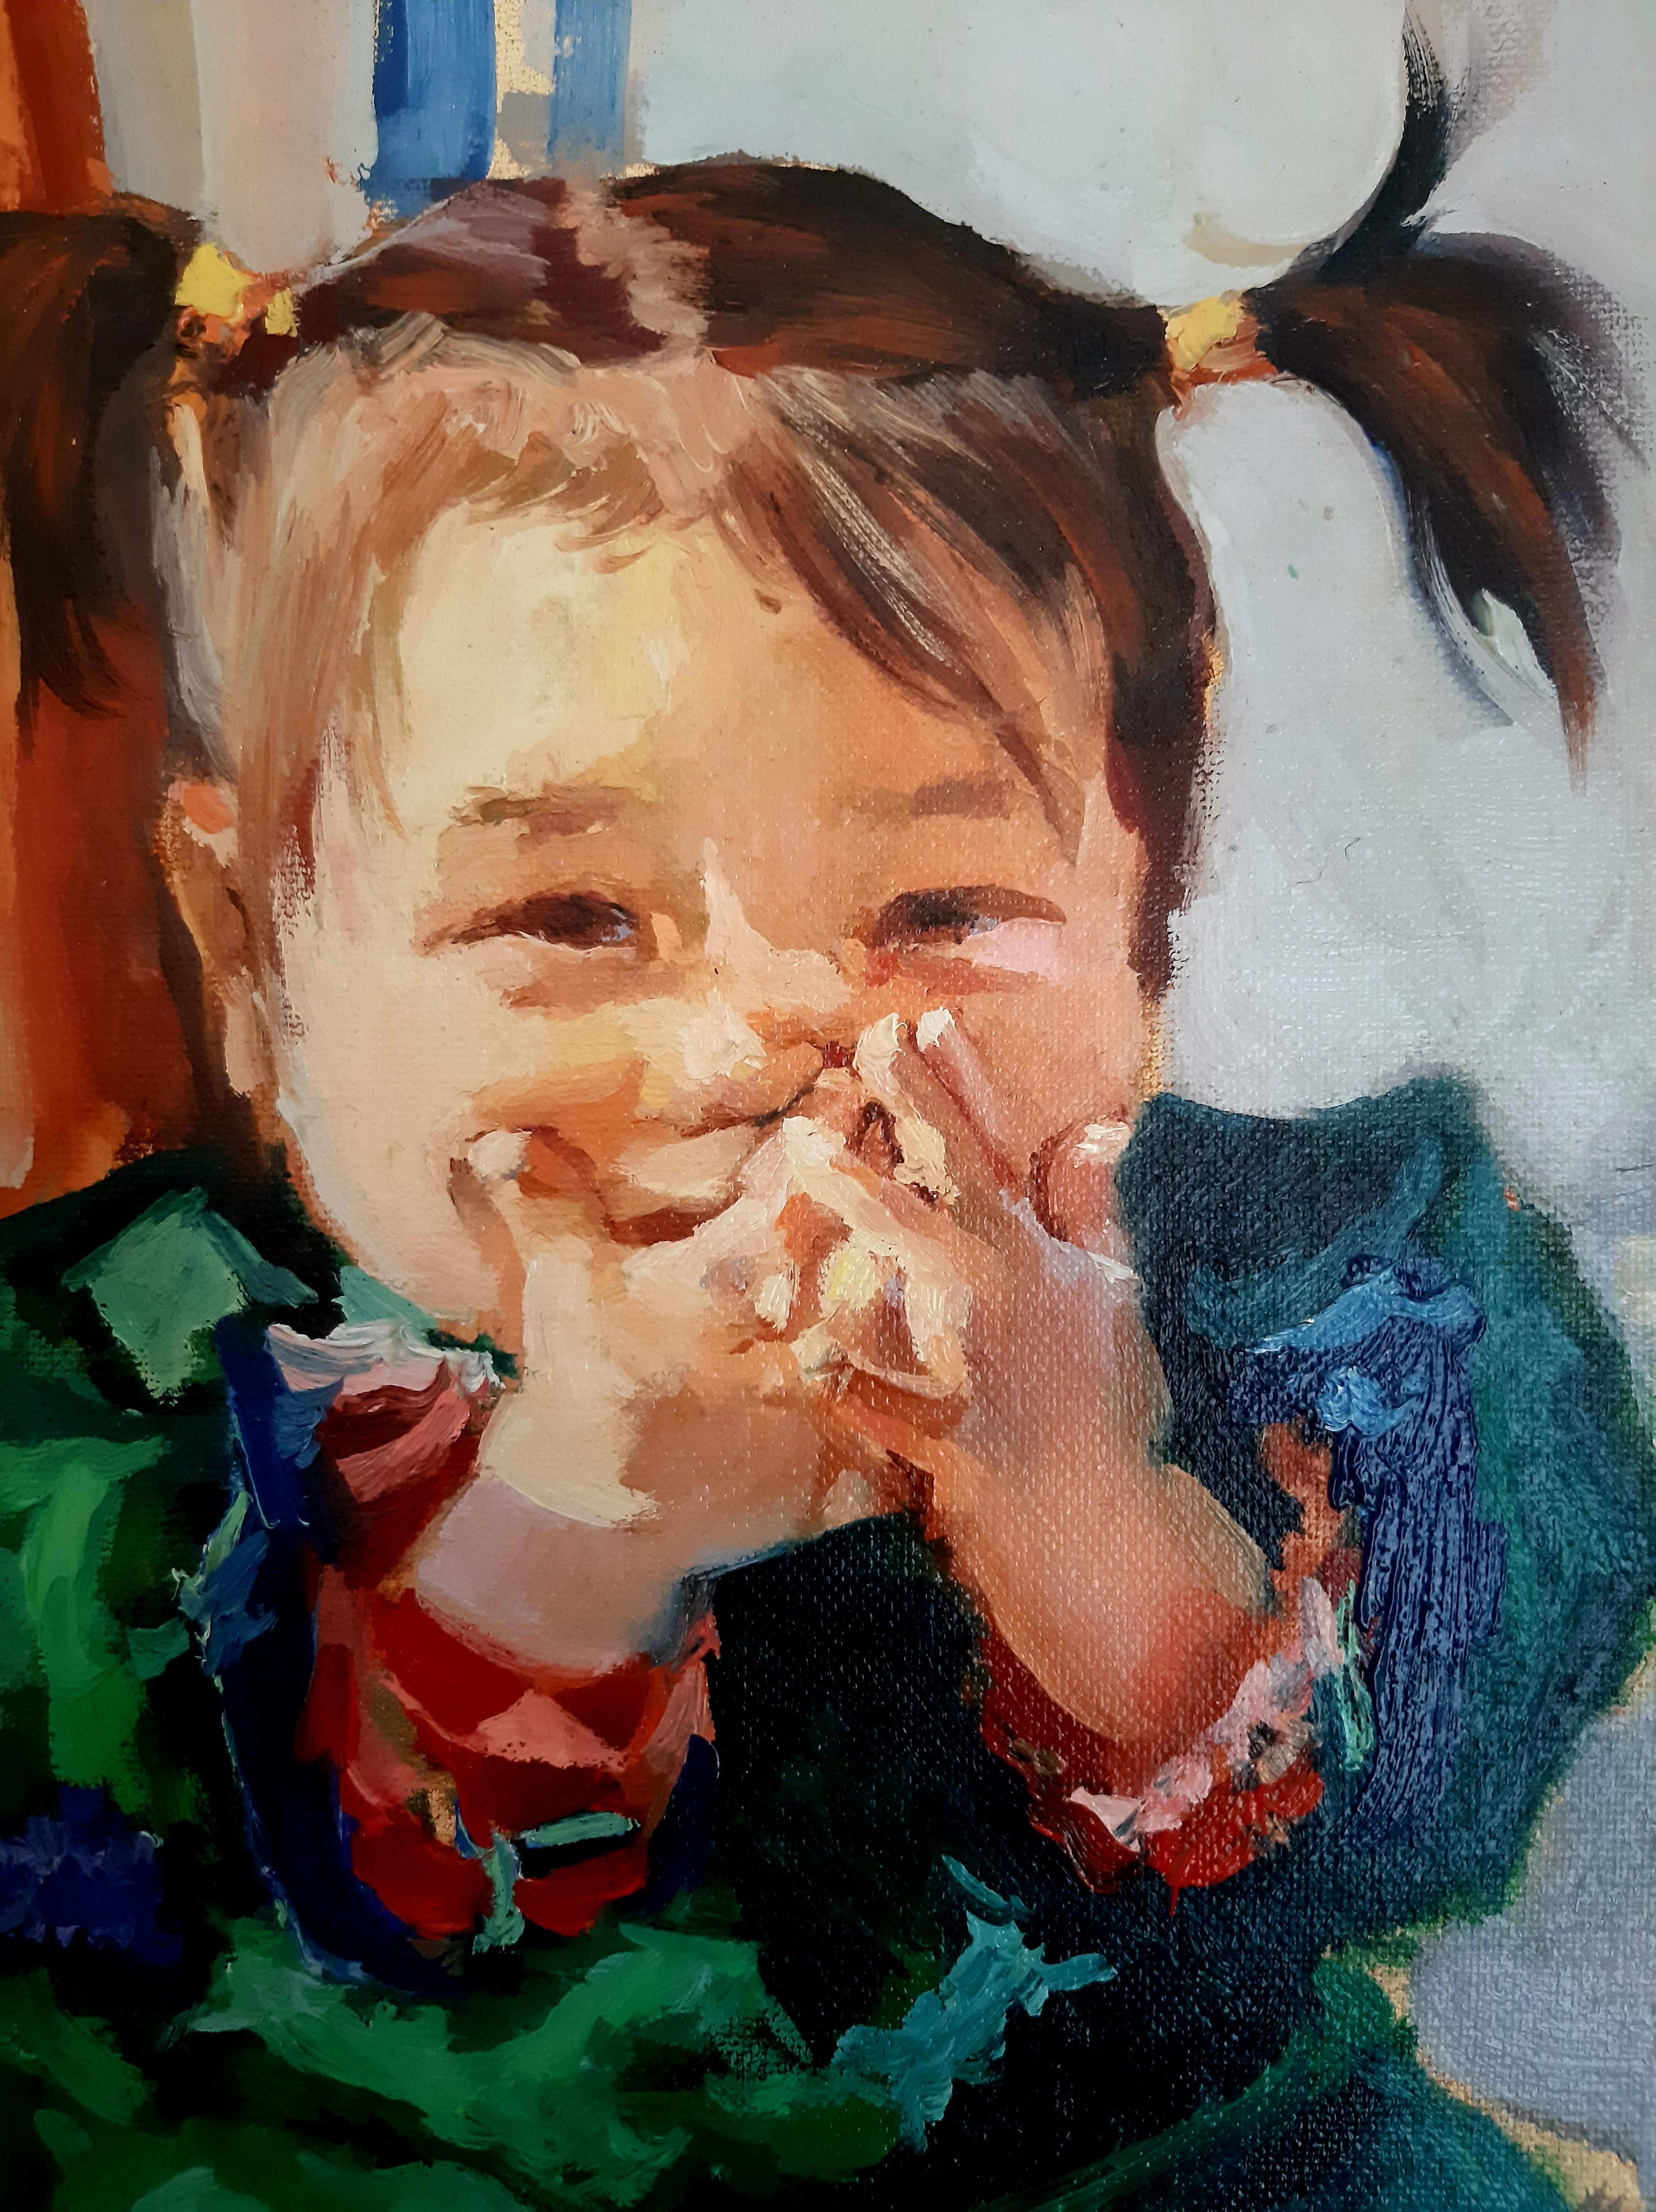 Max Skoblinsky  Portrait Painting - "Emotions of Crossed Fingers"  Portrait of Asia Girl Oil painting on canvas